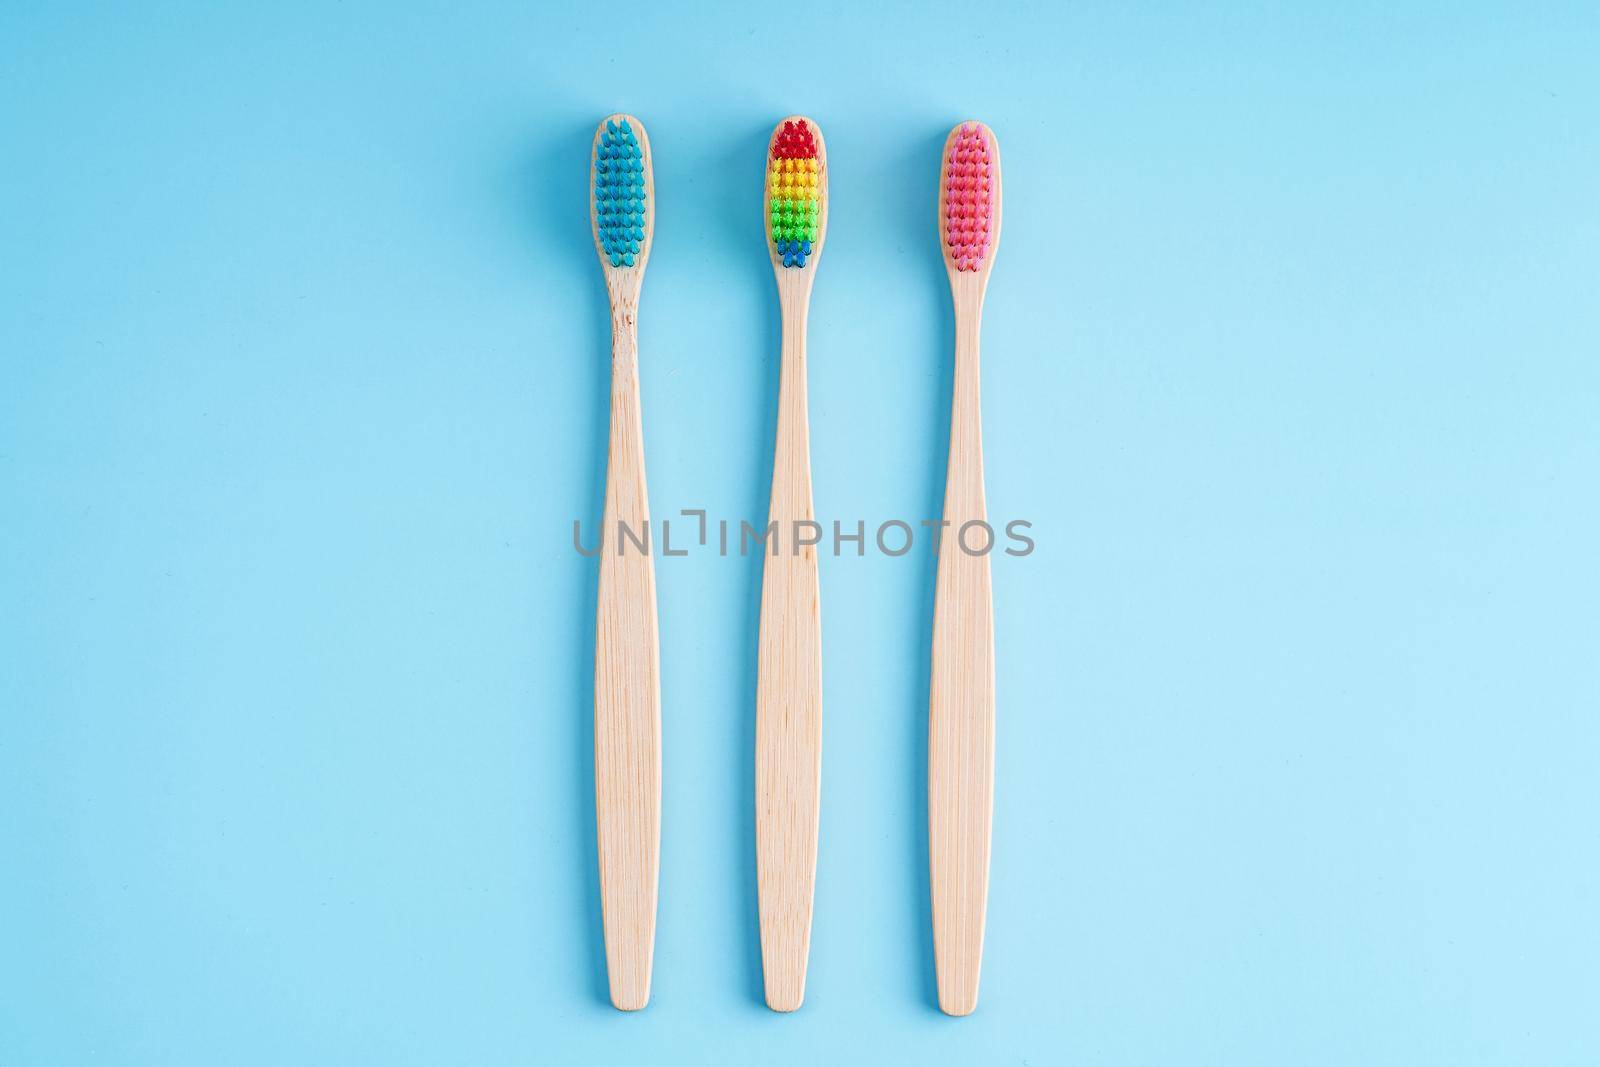 A bunch of eco-friendly bamboo toothbrushes. Global environmental trends. Gender and racial inequality. Toothbrushes of different genders by Try_my_best